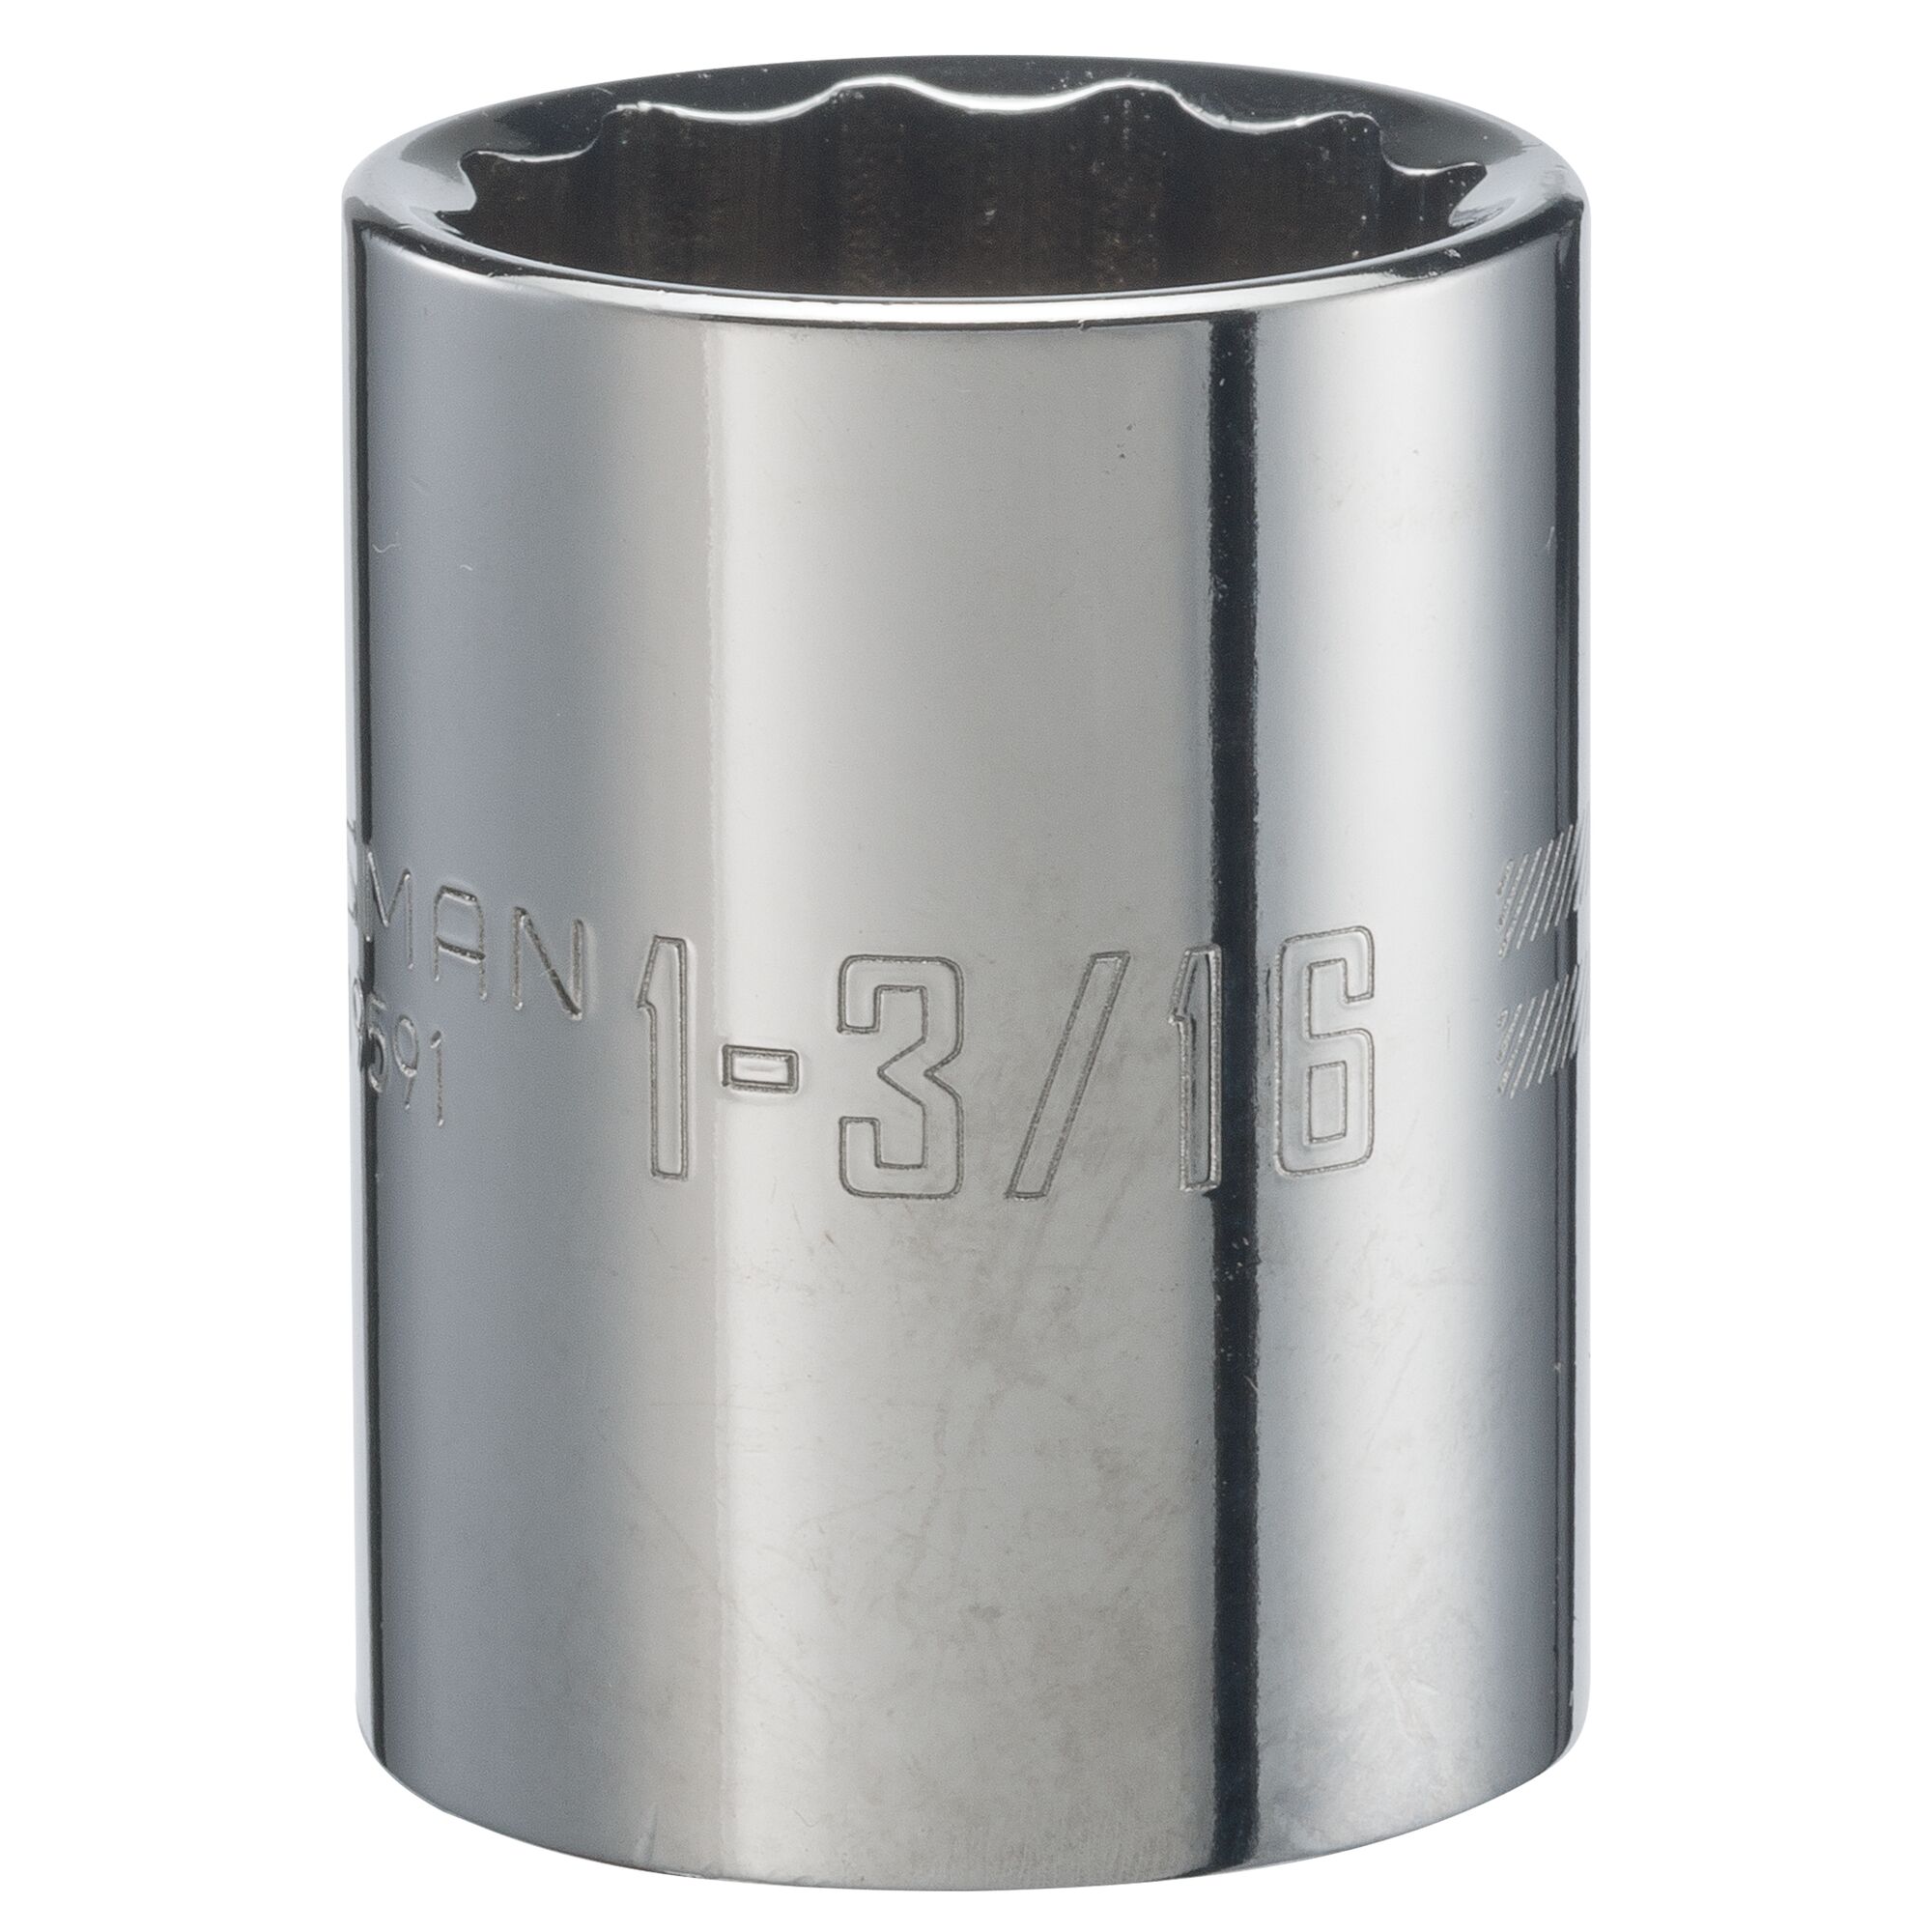 3 quarters inch drive 1 and 3 sixteenth inch 12 point S A E shallow socket.
